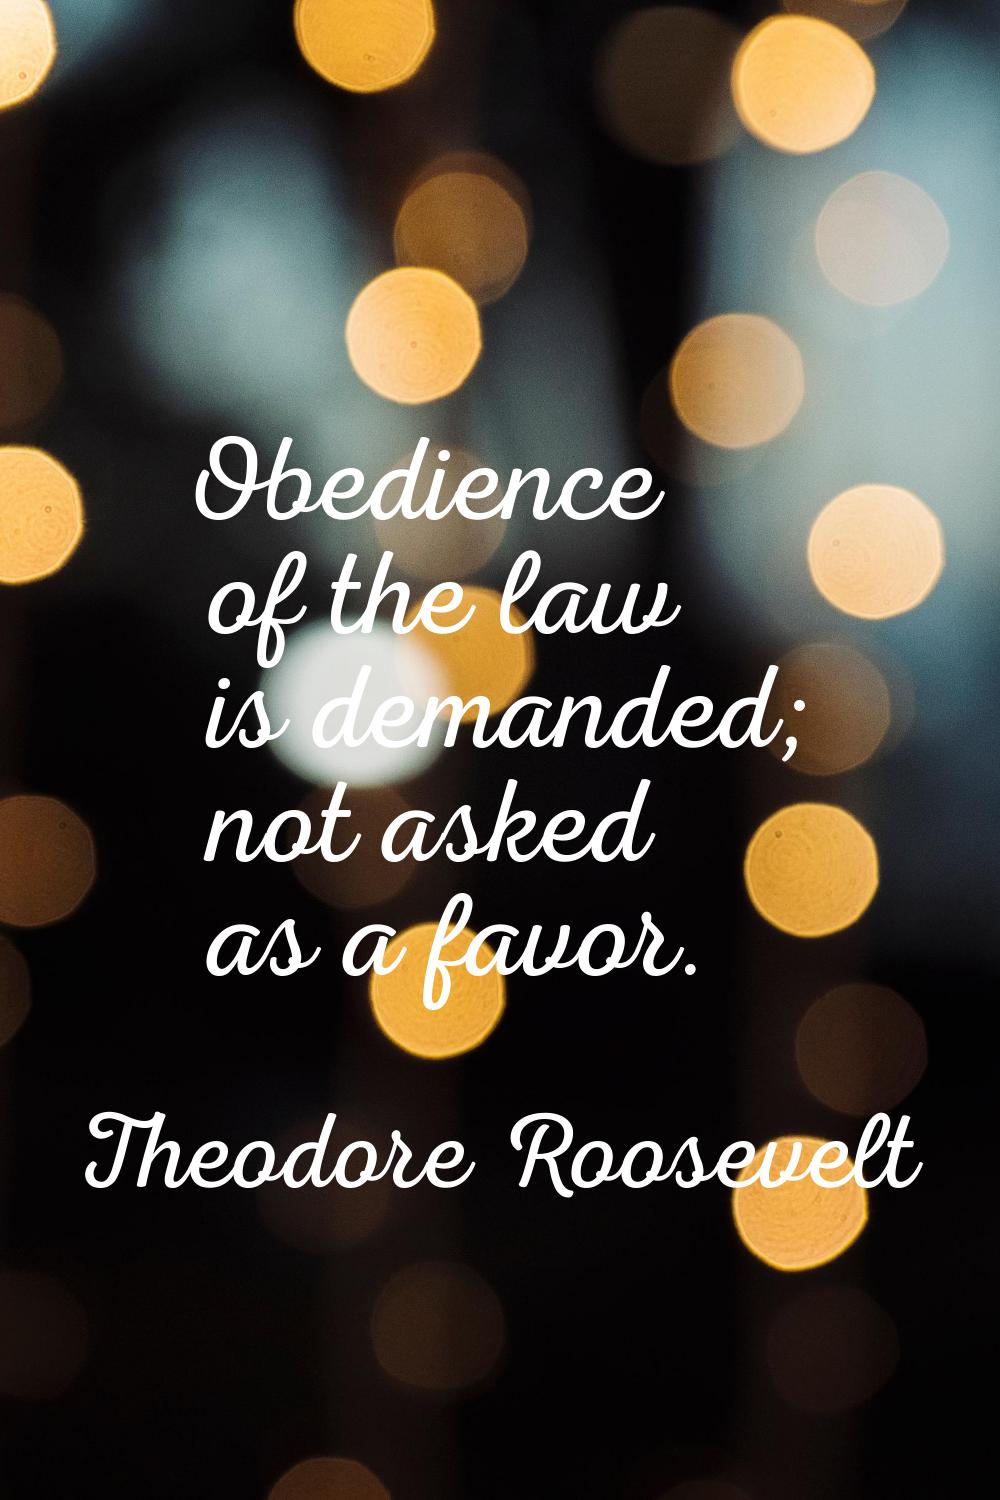 Obedience of the law is demanded; not asked as a favor.